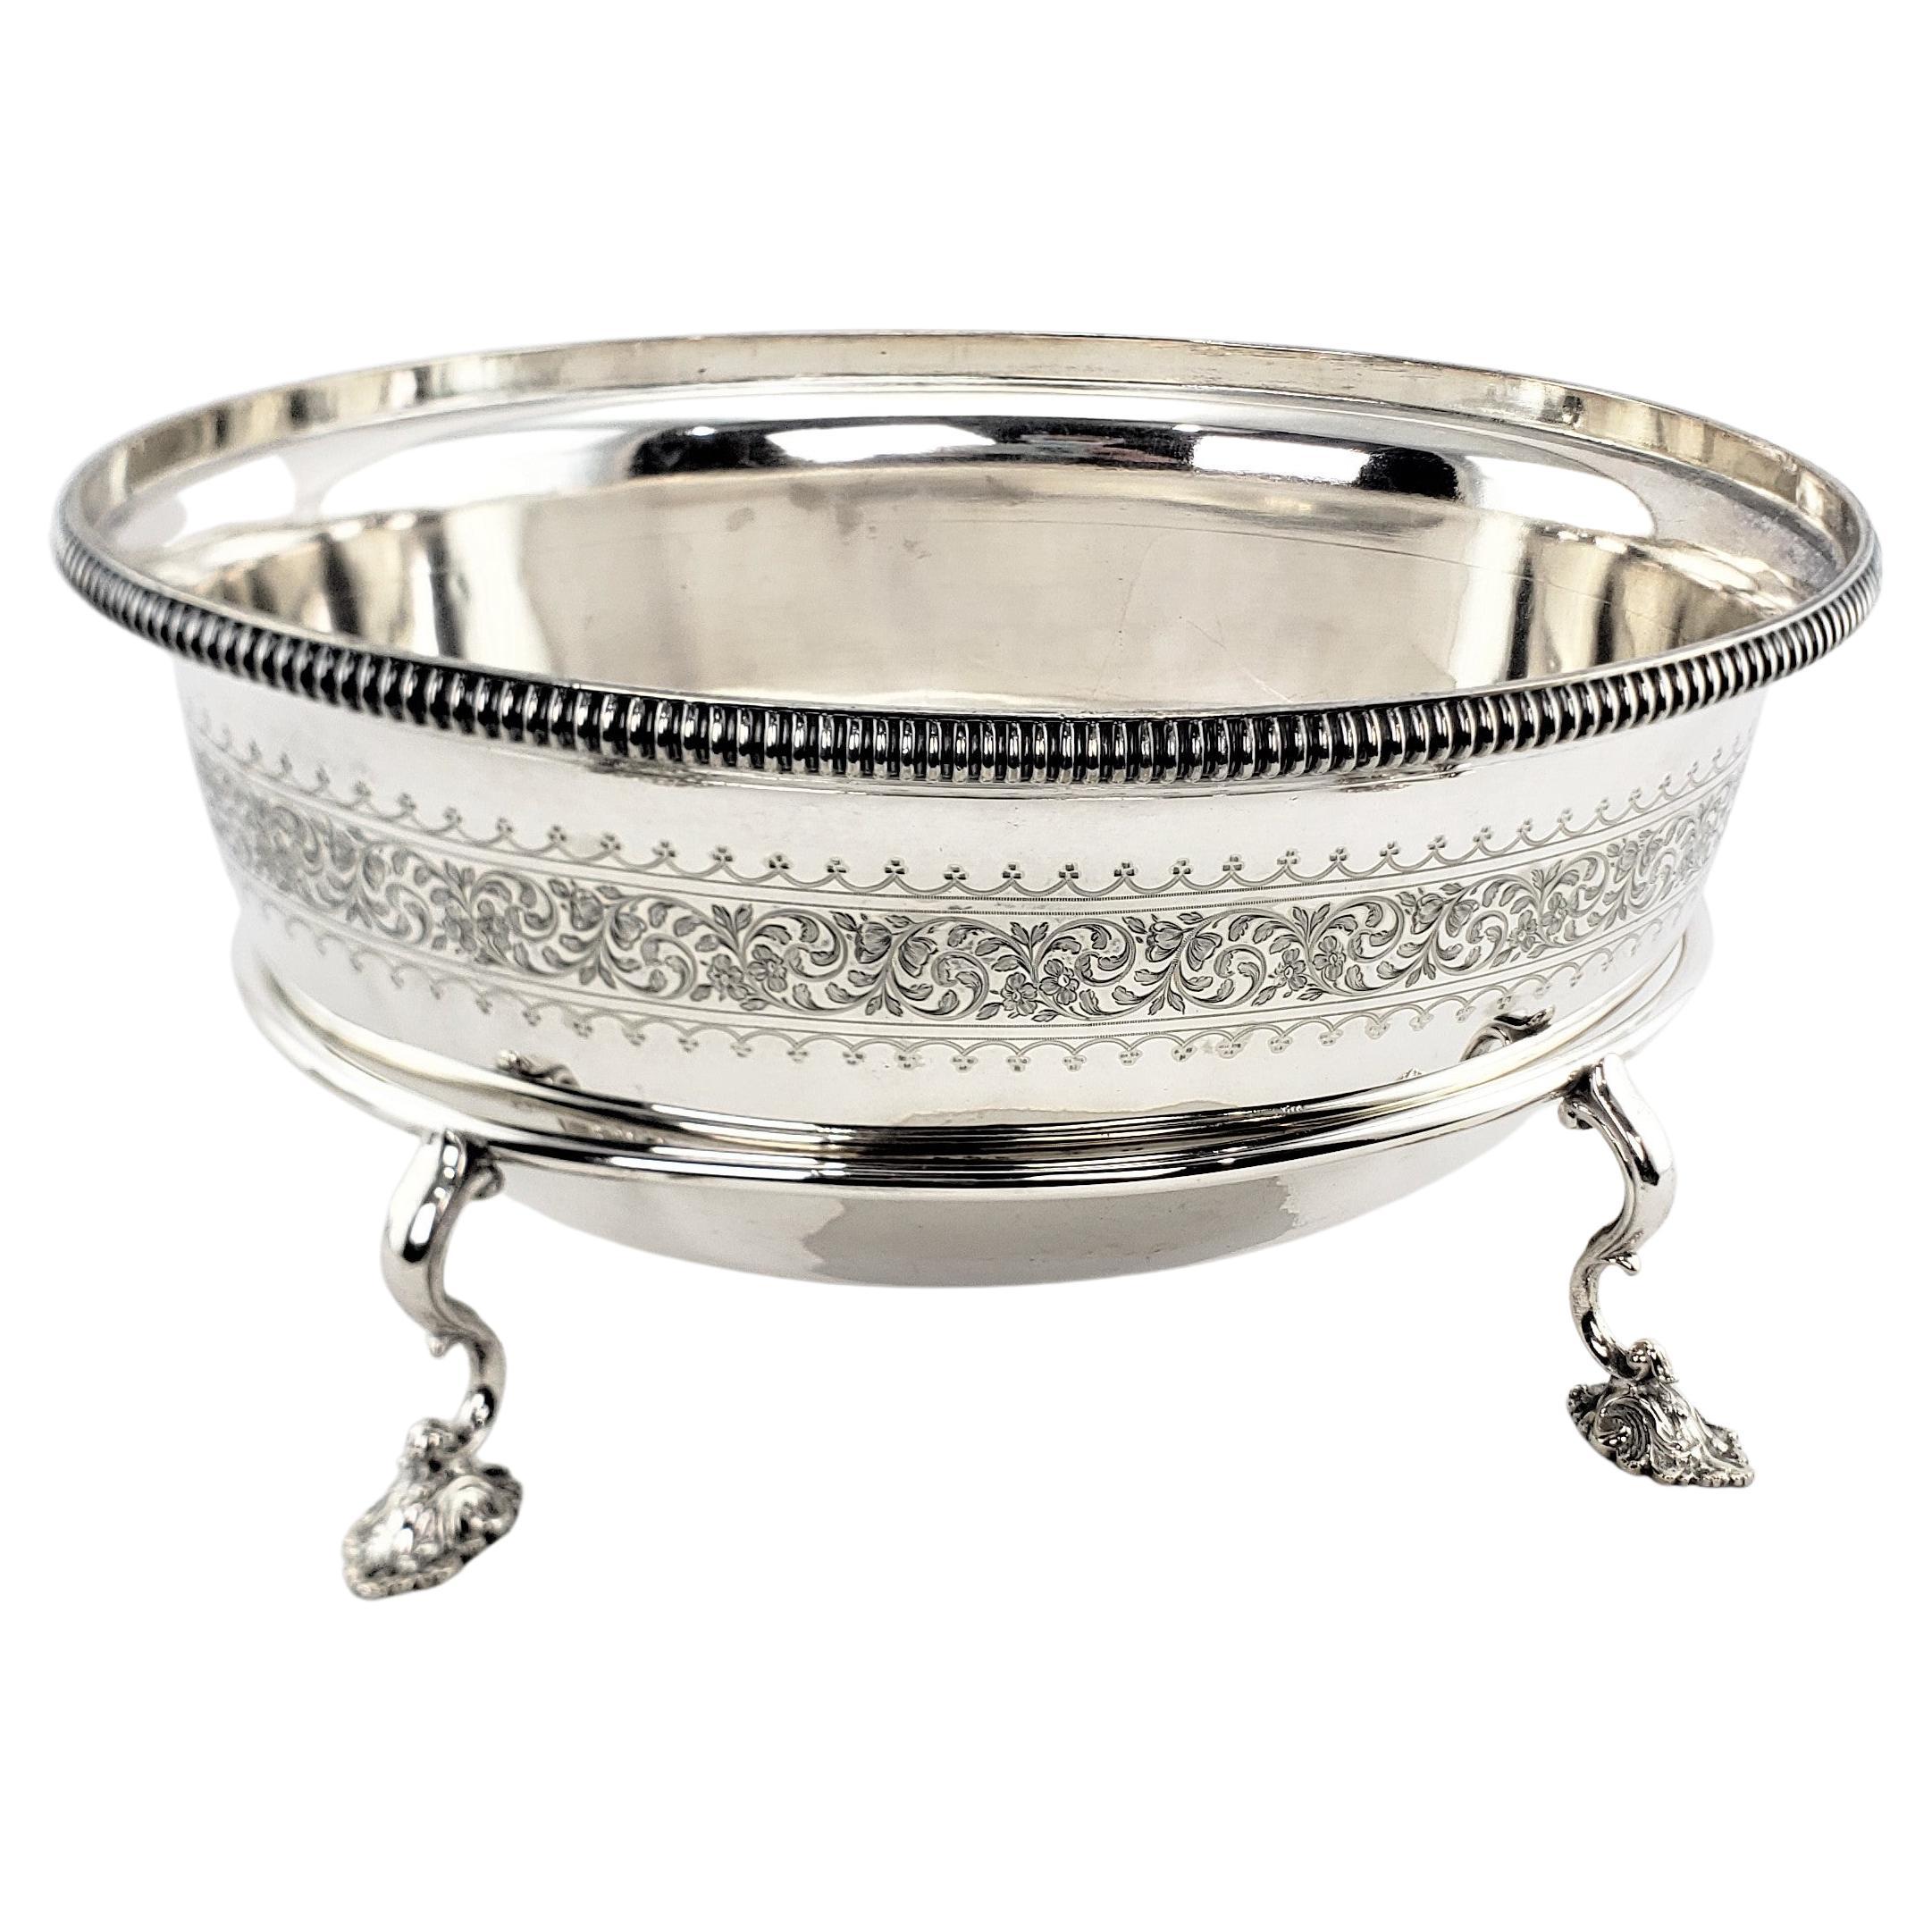 Antique Silver Plated Converted Meat Dome Ice Trough, Wine Cooler or Centerpiece For Sale